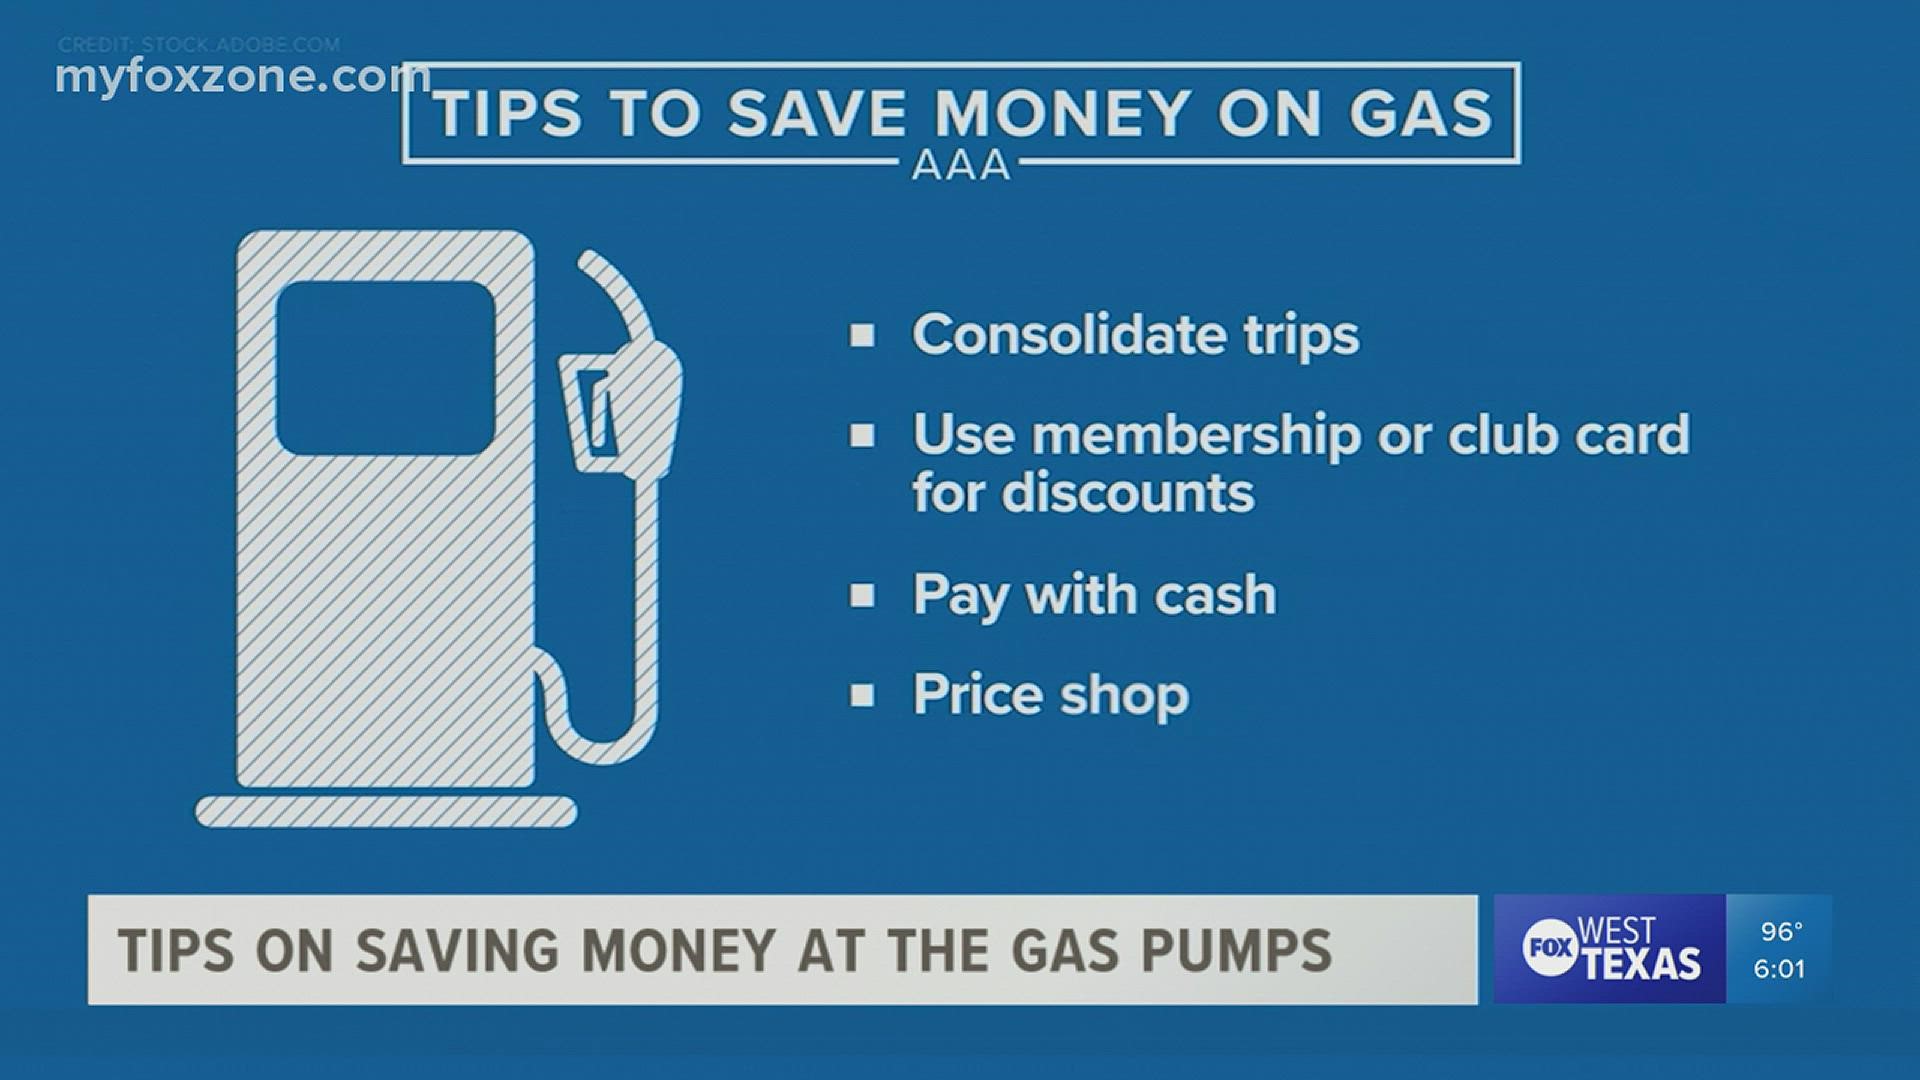 With gas prices not expected to go down any time soon, AAA Texas shared tips drivers can use to save money when buying gas.